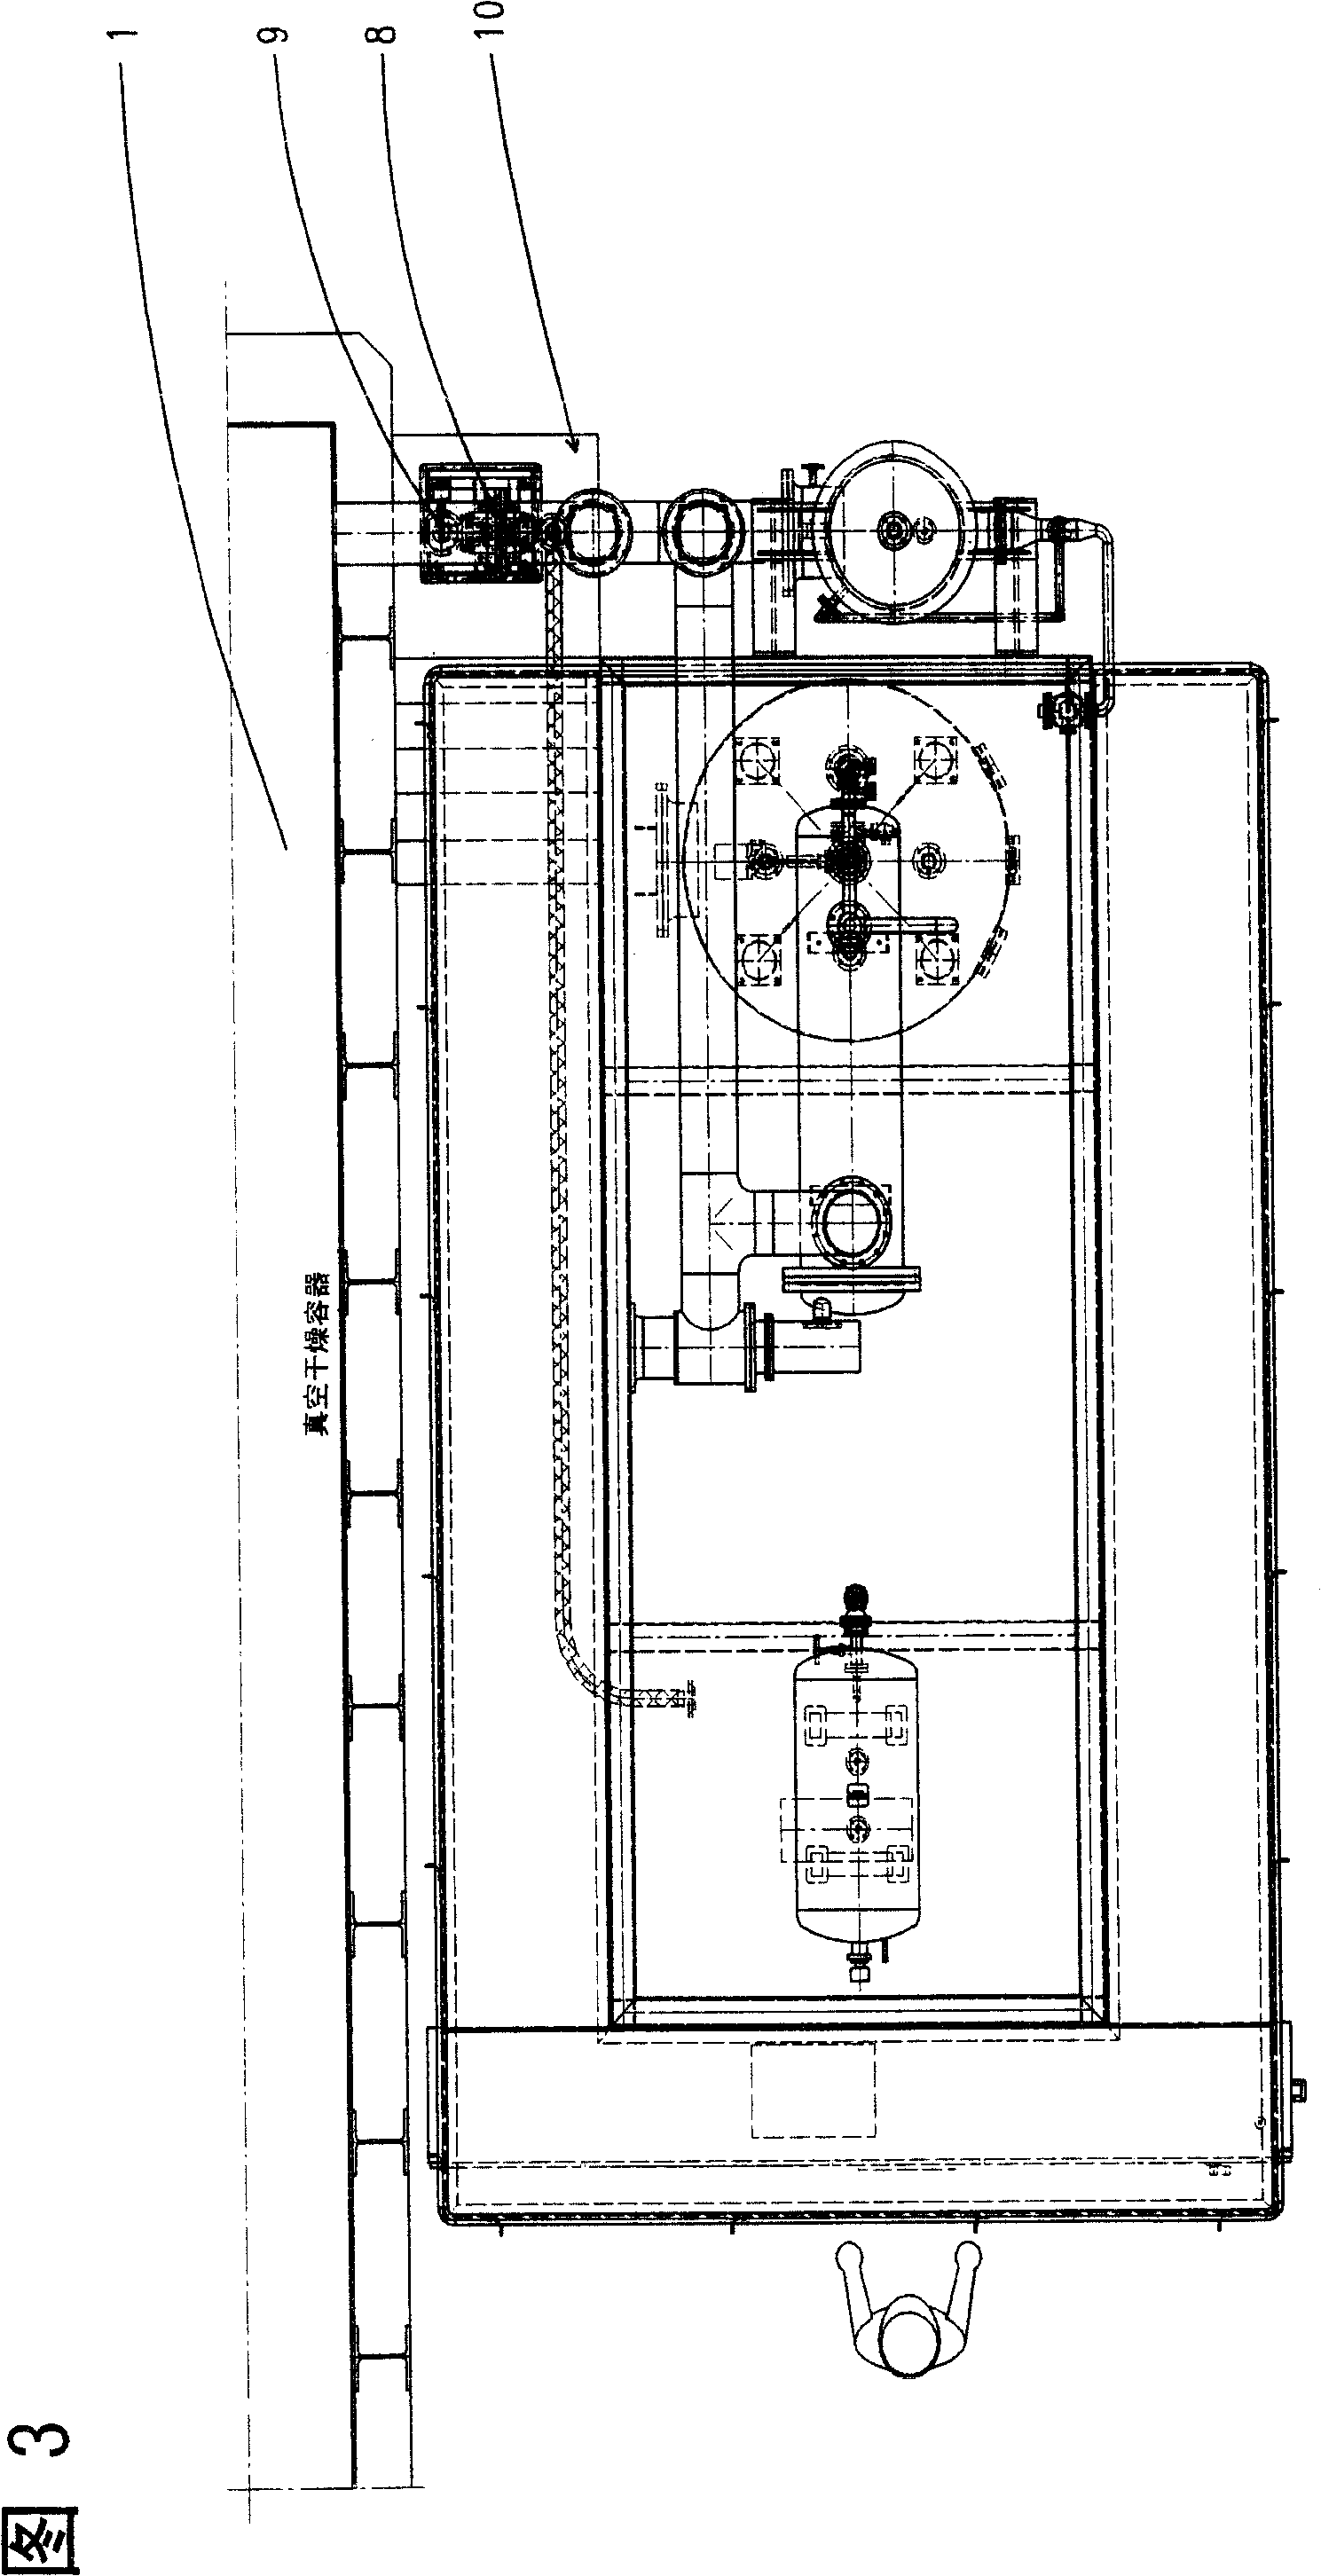 Heating device for components